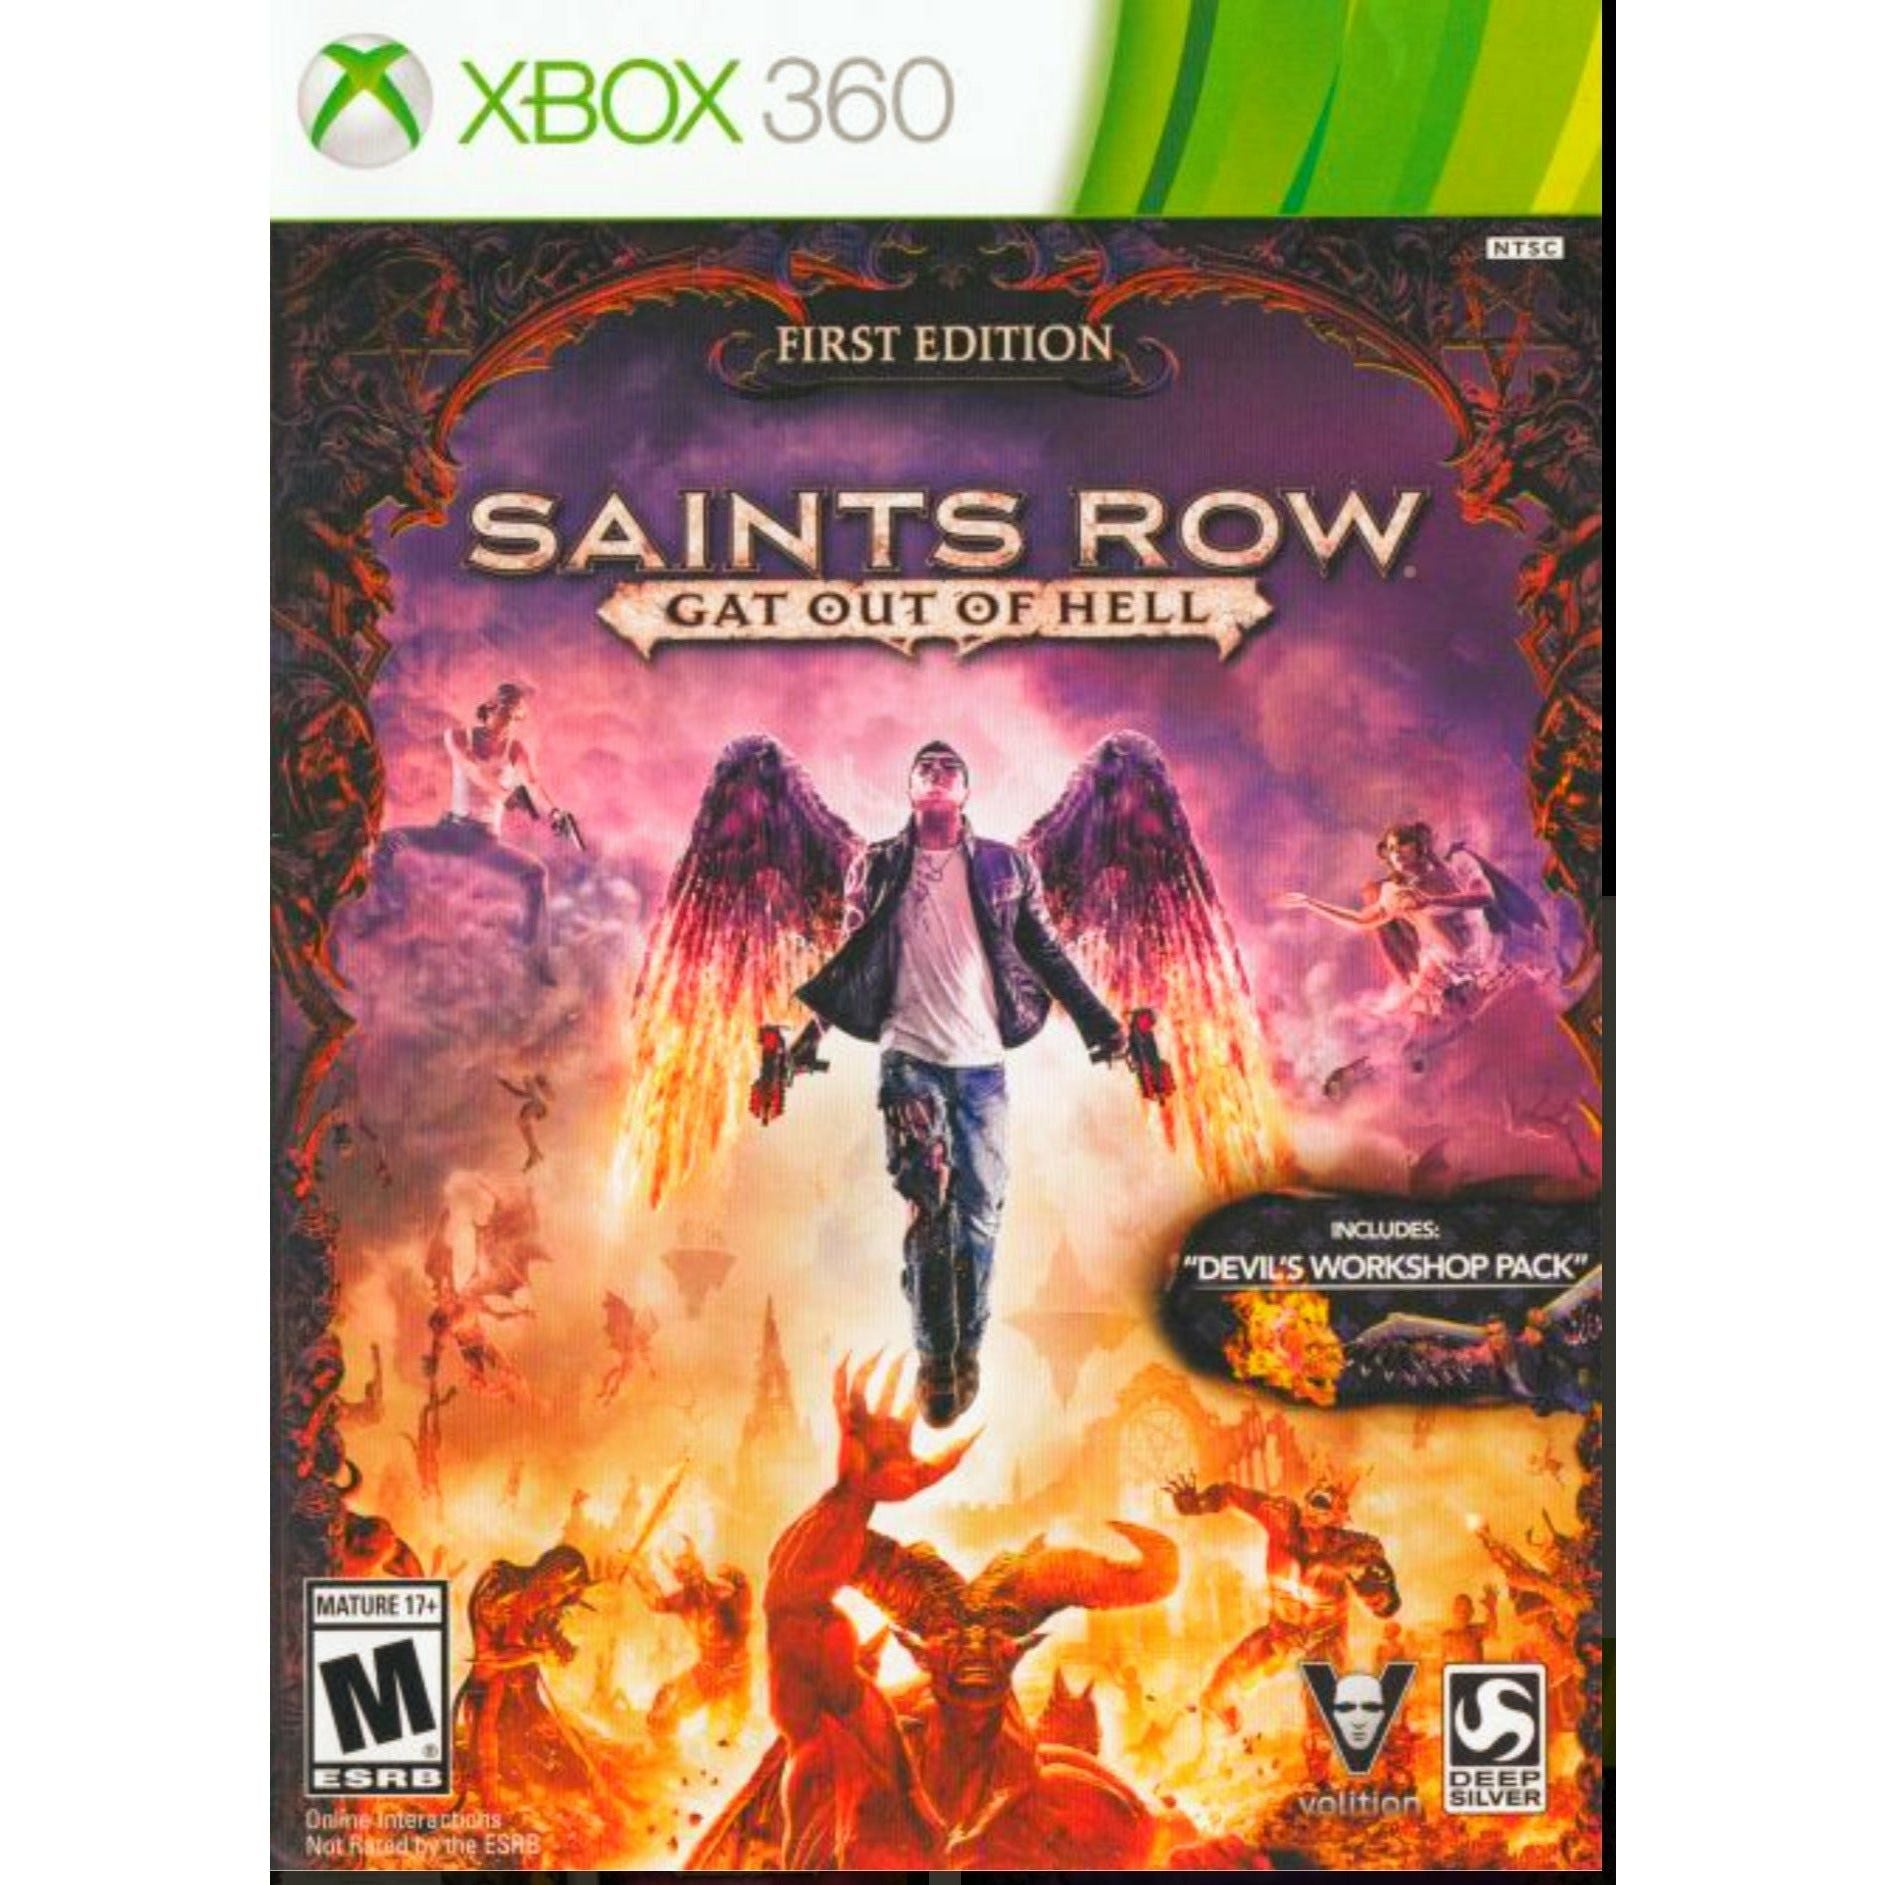 XBOX 360 - Saints Row Gat Out of Hell First Edition